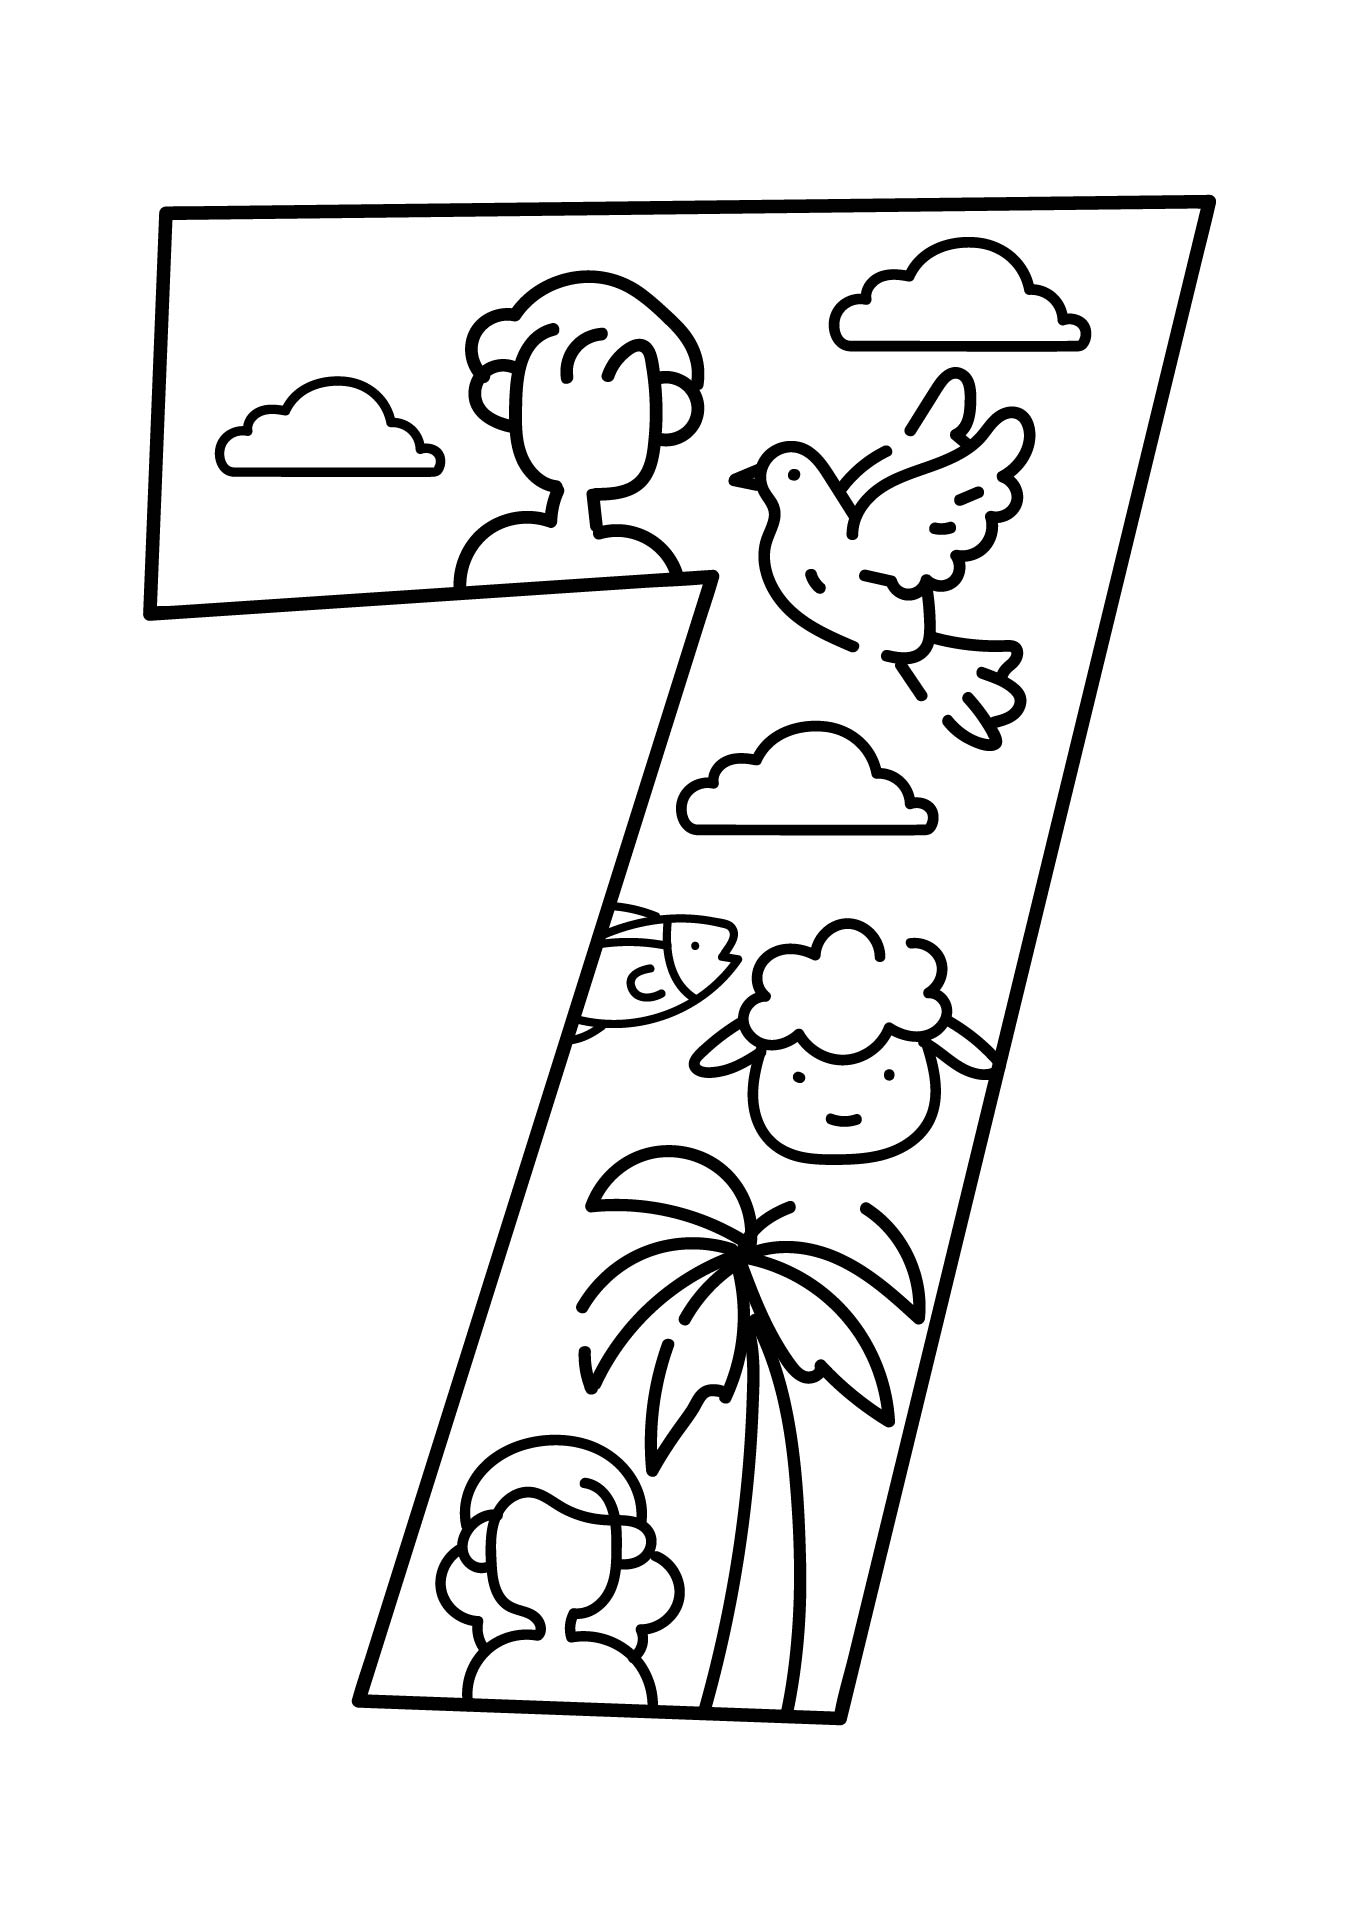 7-Day Creation Coloring Page